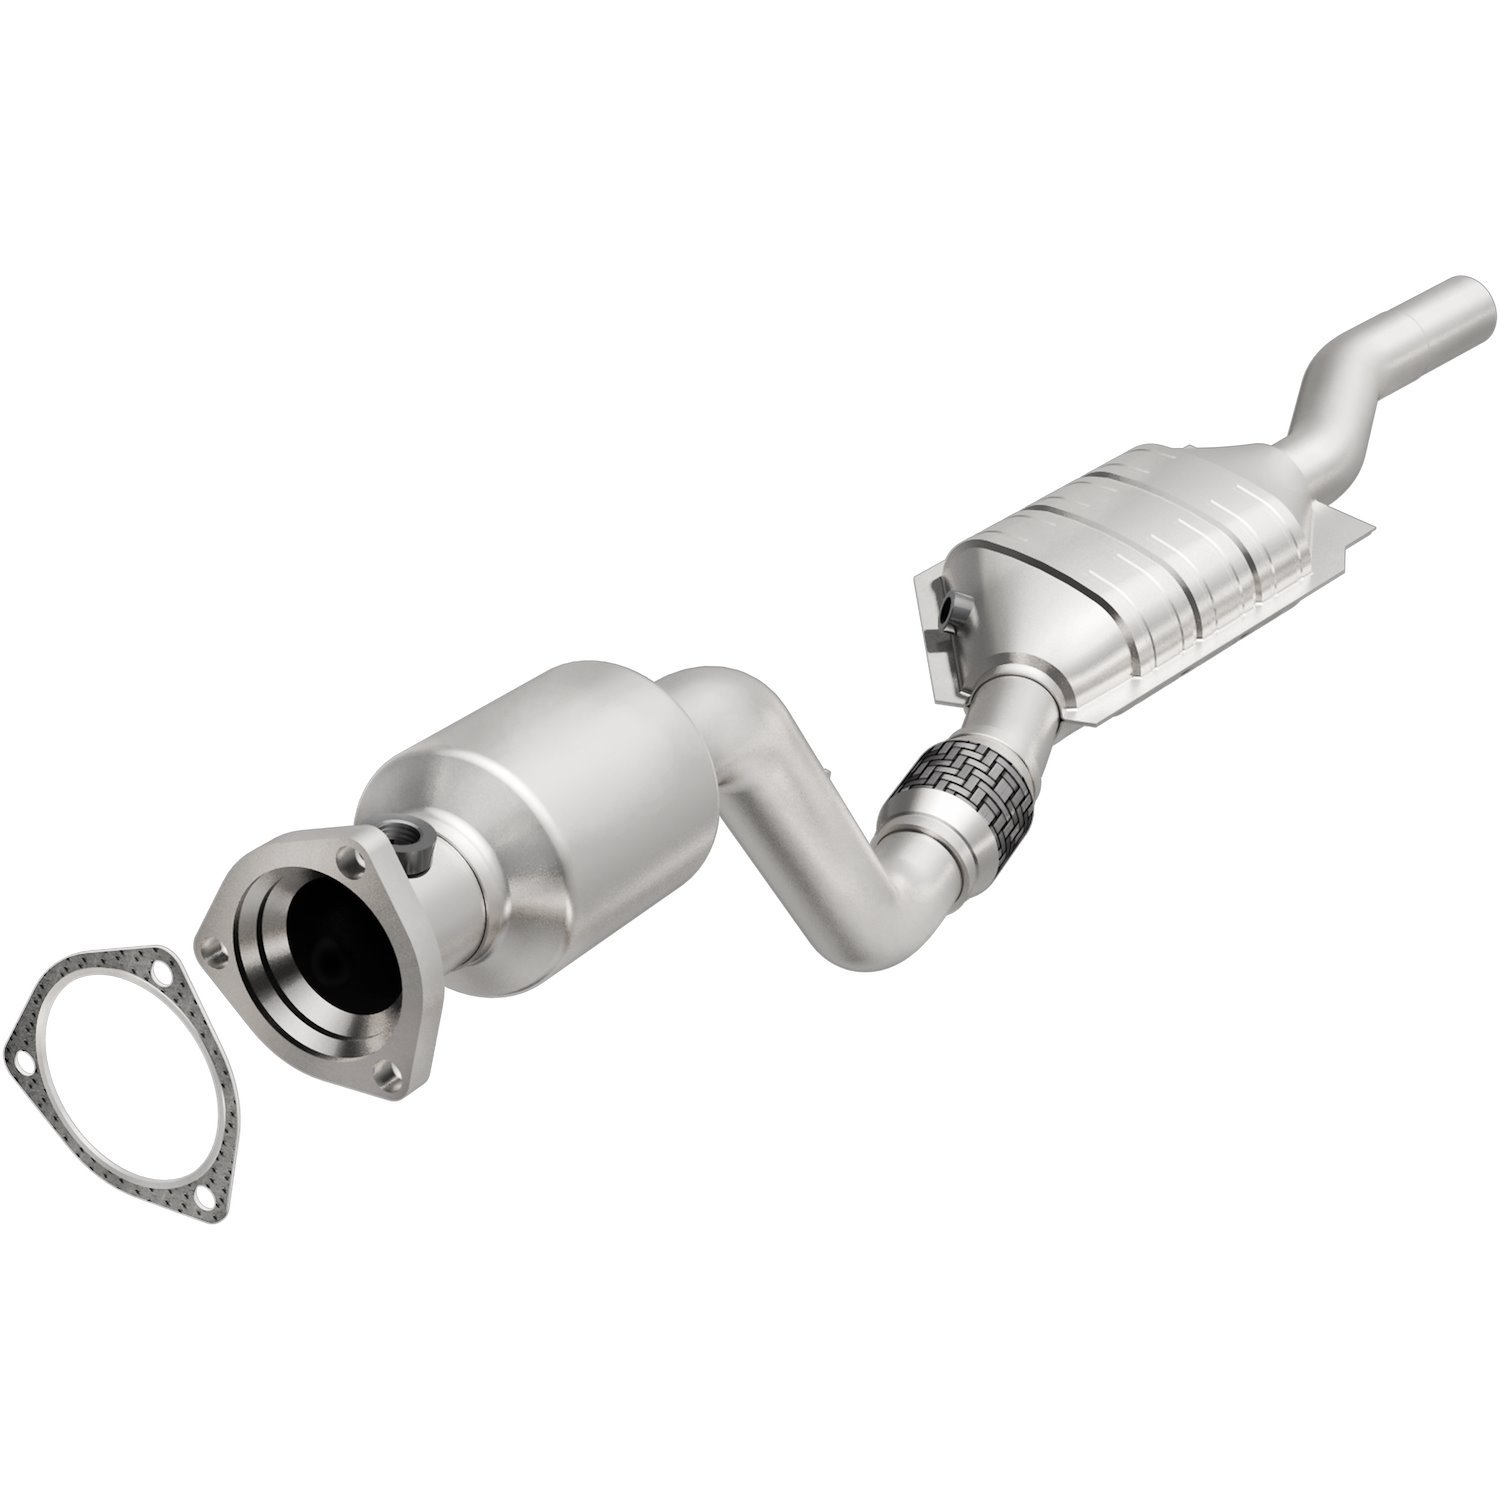 California Grade CARB Compliant Direct-Fit Catalytic Converter 444333